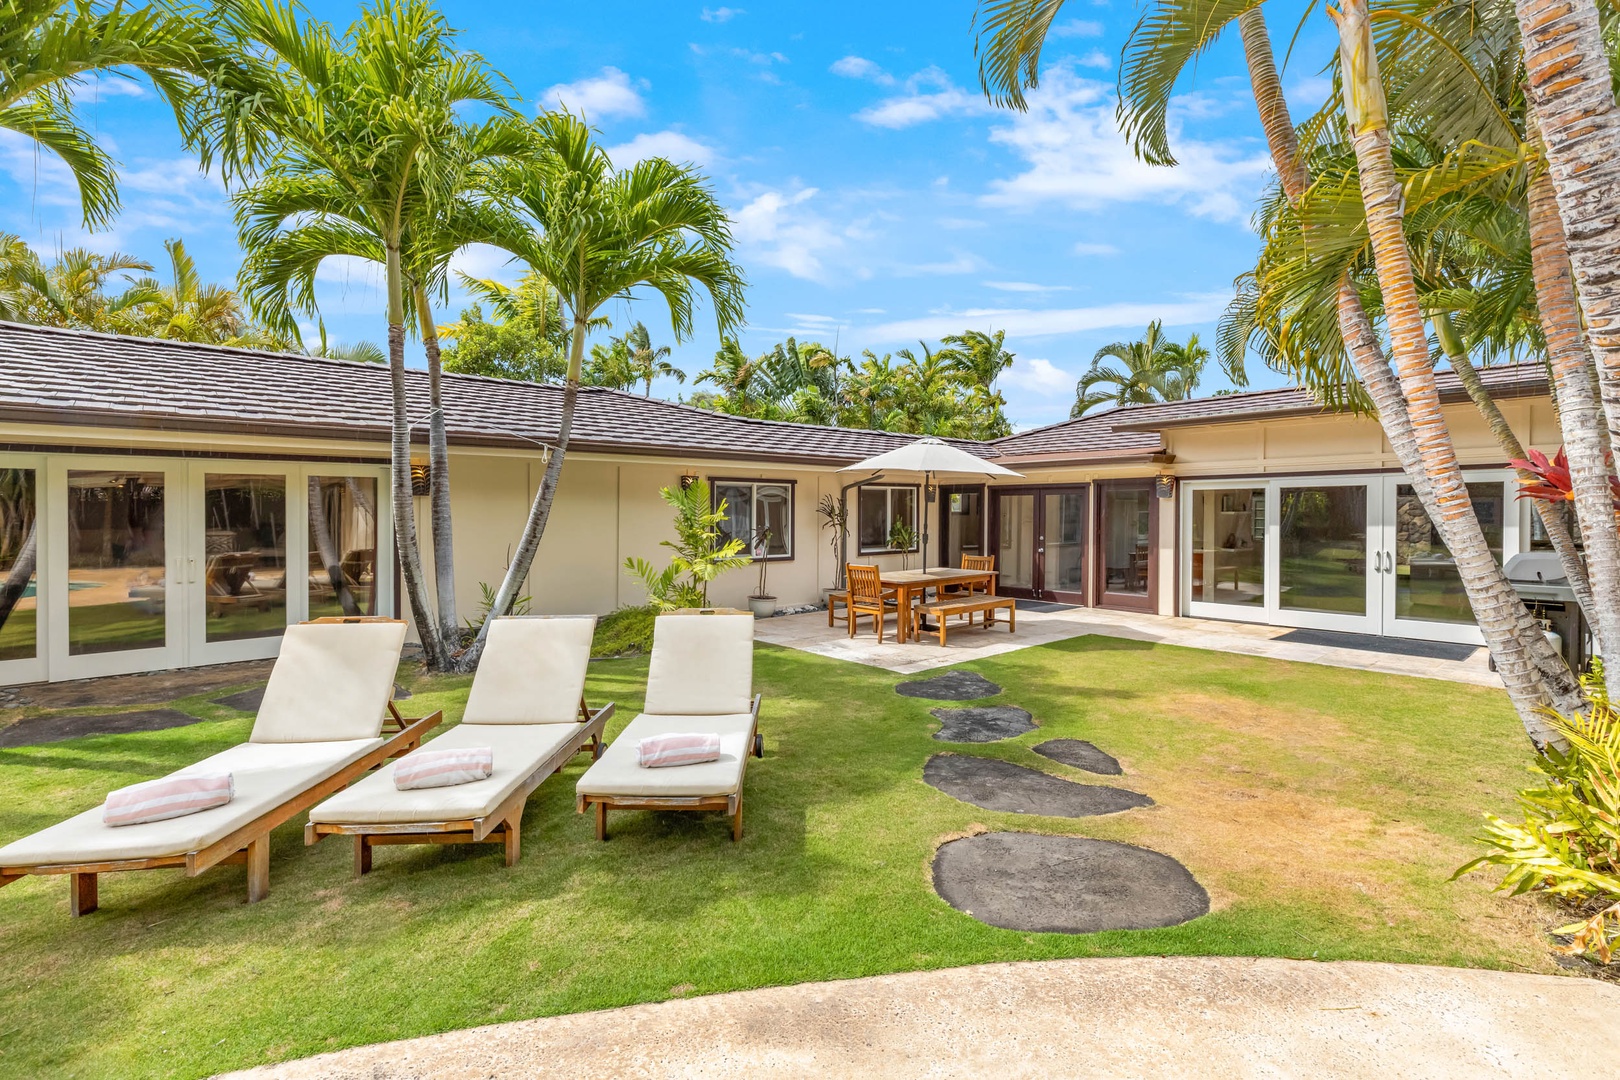 Honolulu Vacation Rentals, Kahala Breeze - Sun-drenched backyard oasis with comfortable lounging, perfect for relaxation and entertainment in your private slice of paradise.